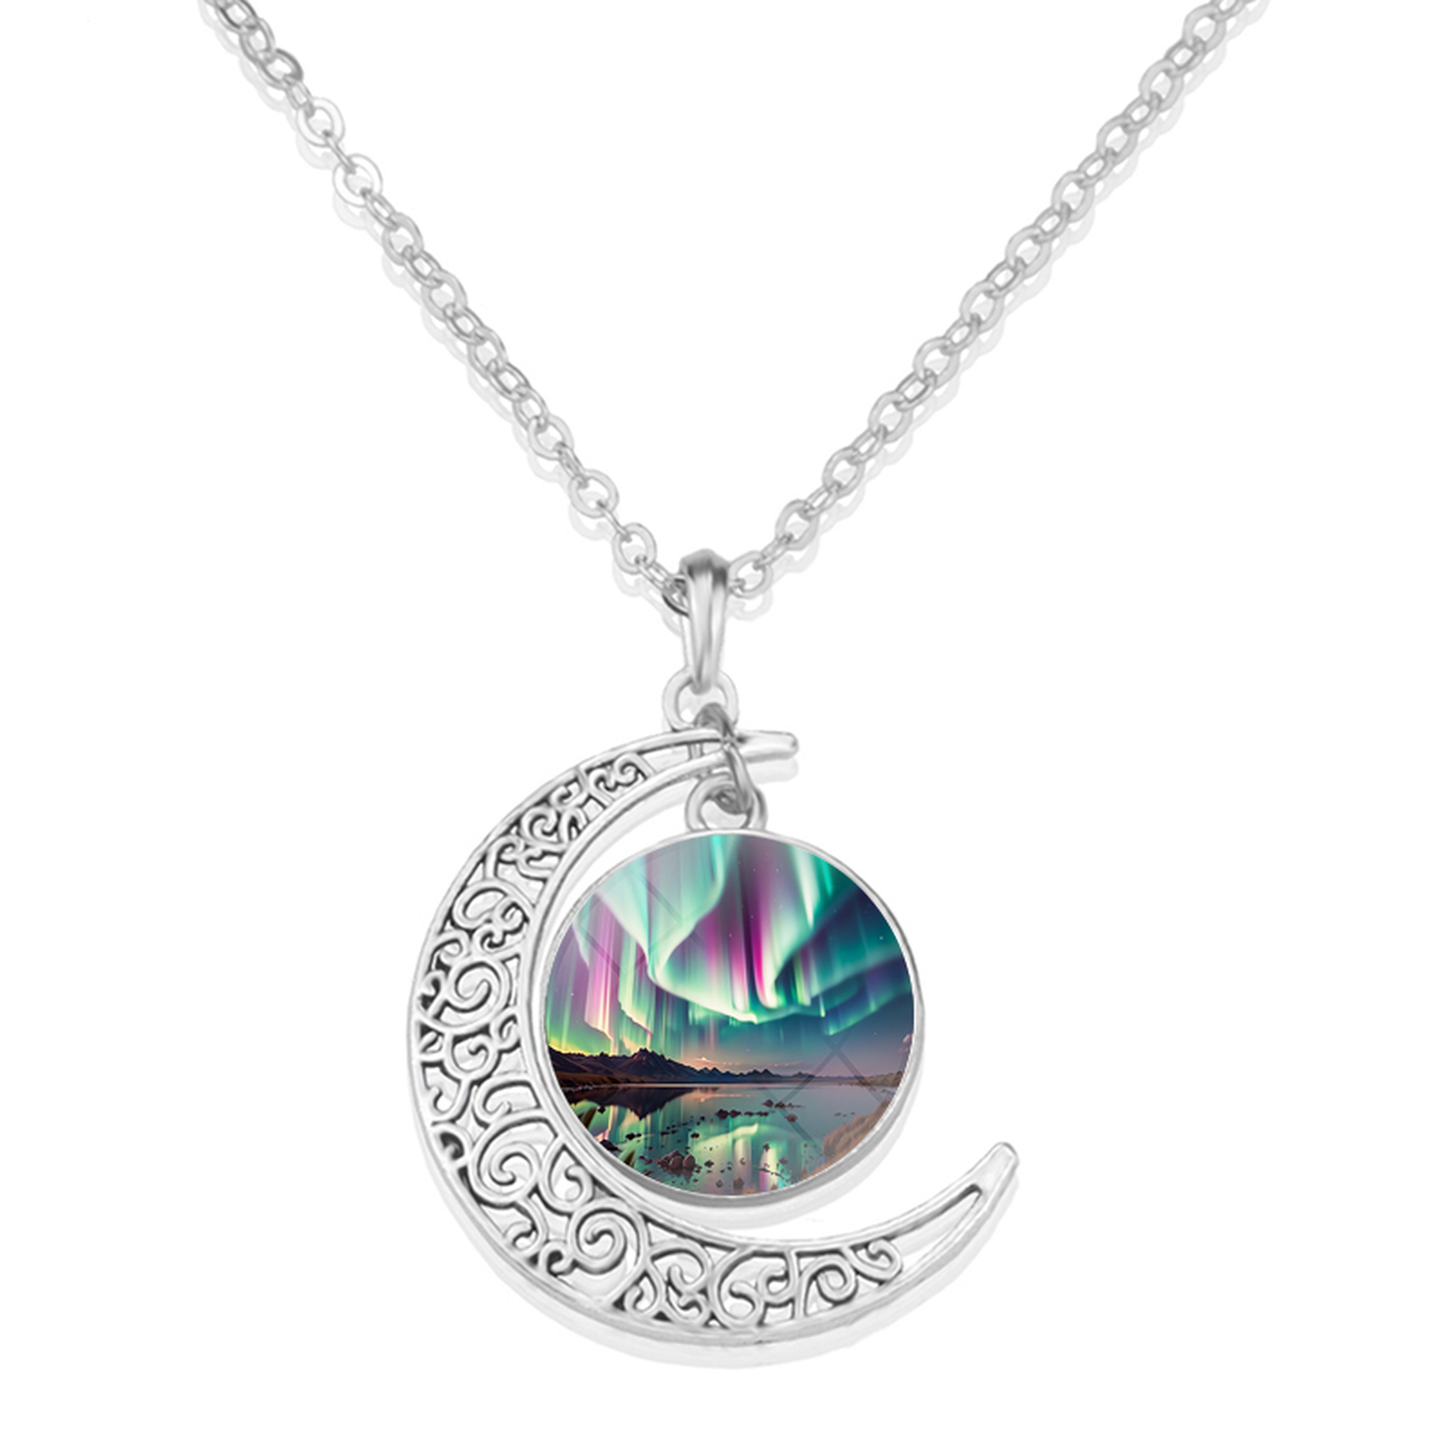 Unique Aurora Borealis Crescent Necklace - Northern Light Jewelry - Crescent Glass Cabochon Pendent Necklace - Perfect Aurora Lovers Gift 7